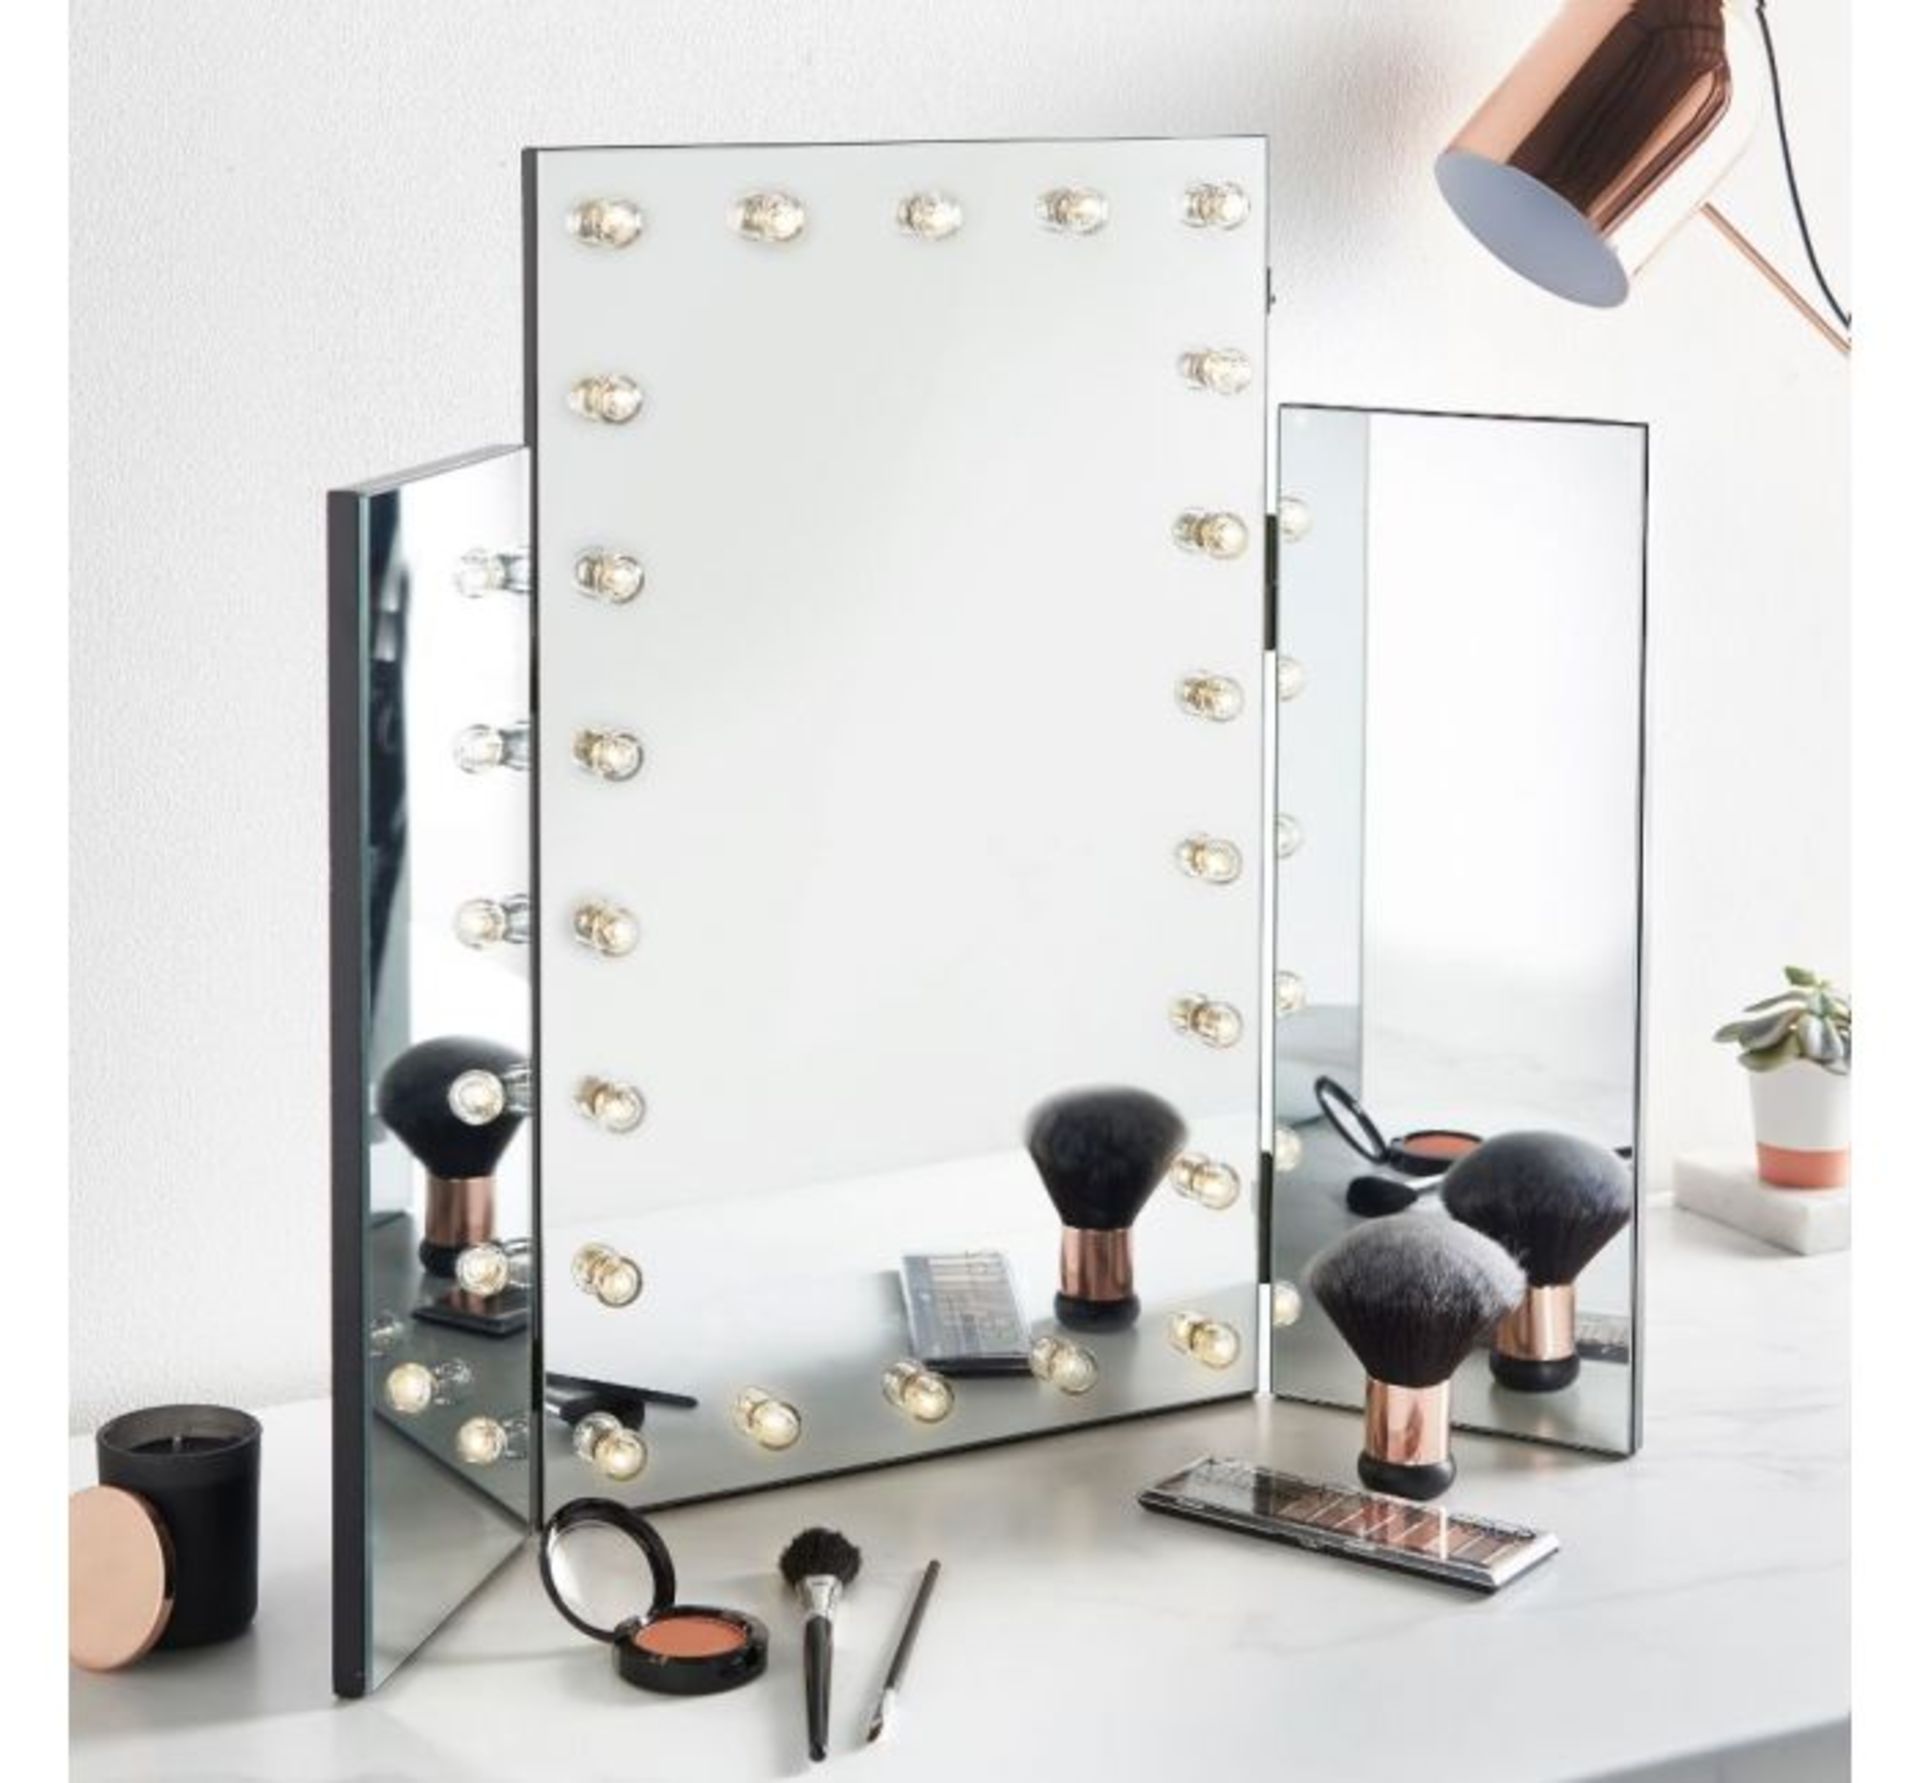 (LV156) Trifold Mirror with Warm LED Lights. Large centre mirror with adjustable side mirrors ... - Image 2 of 2